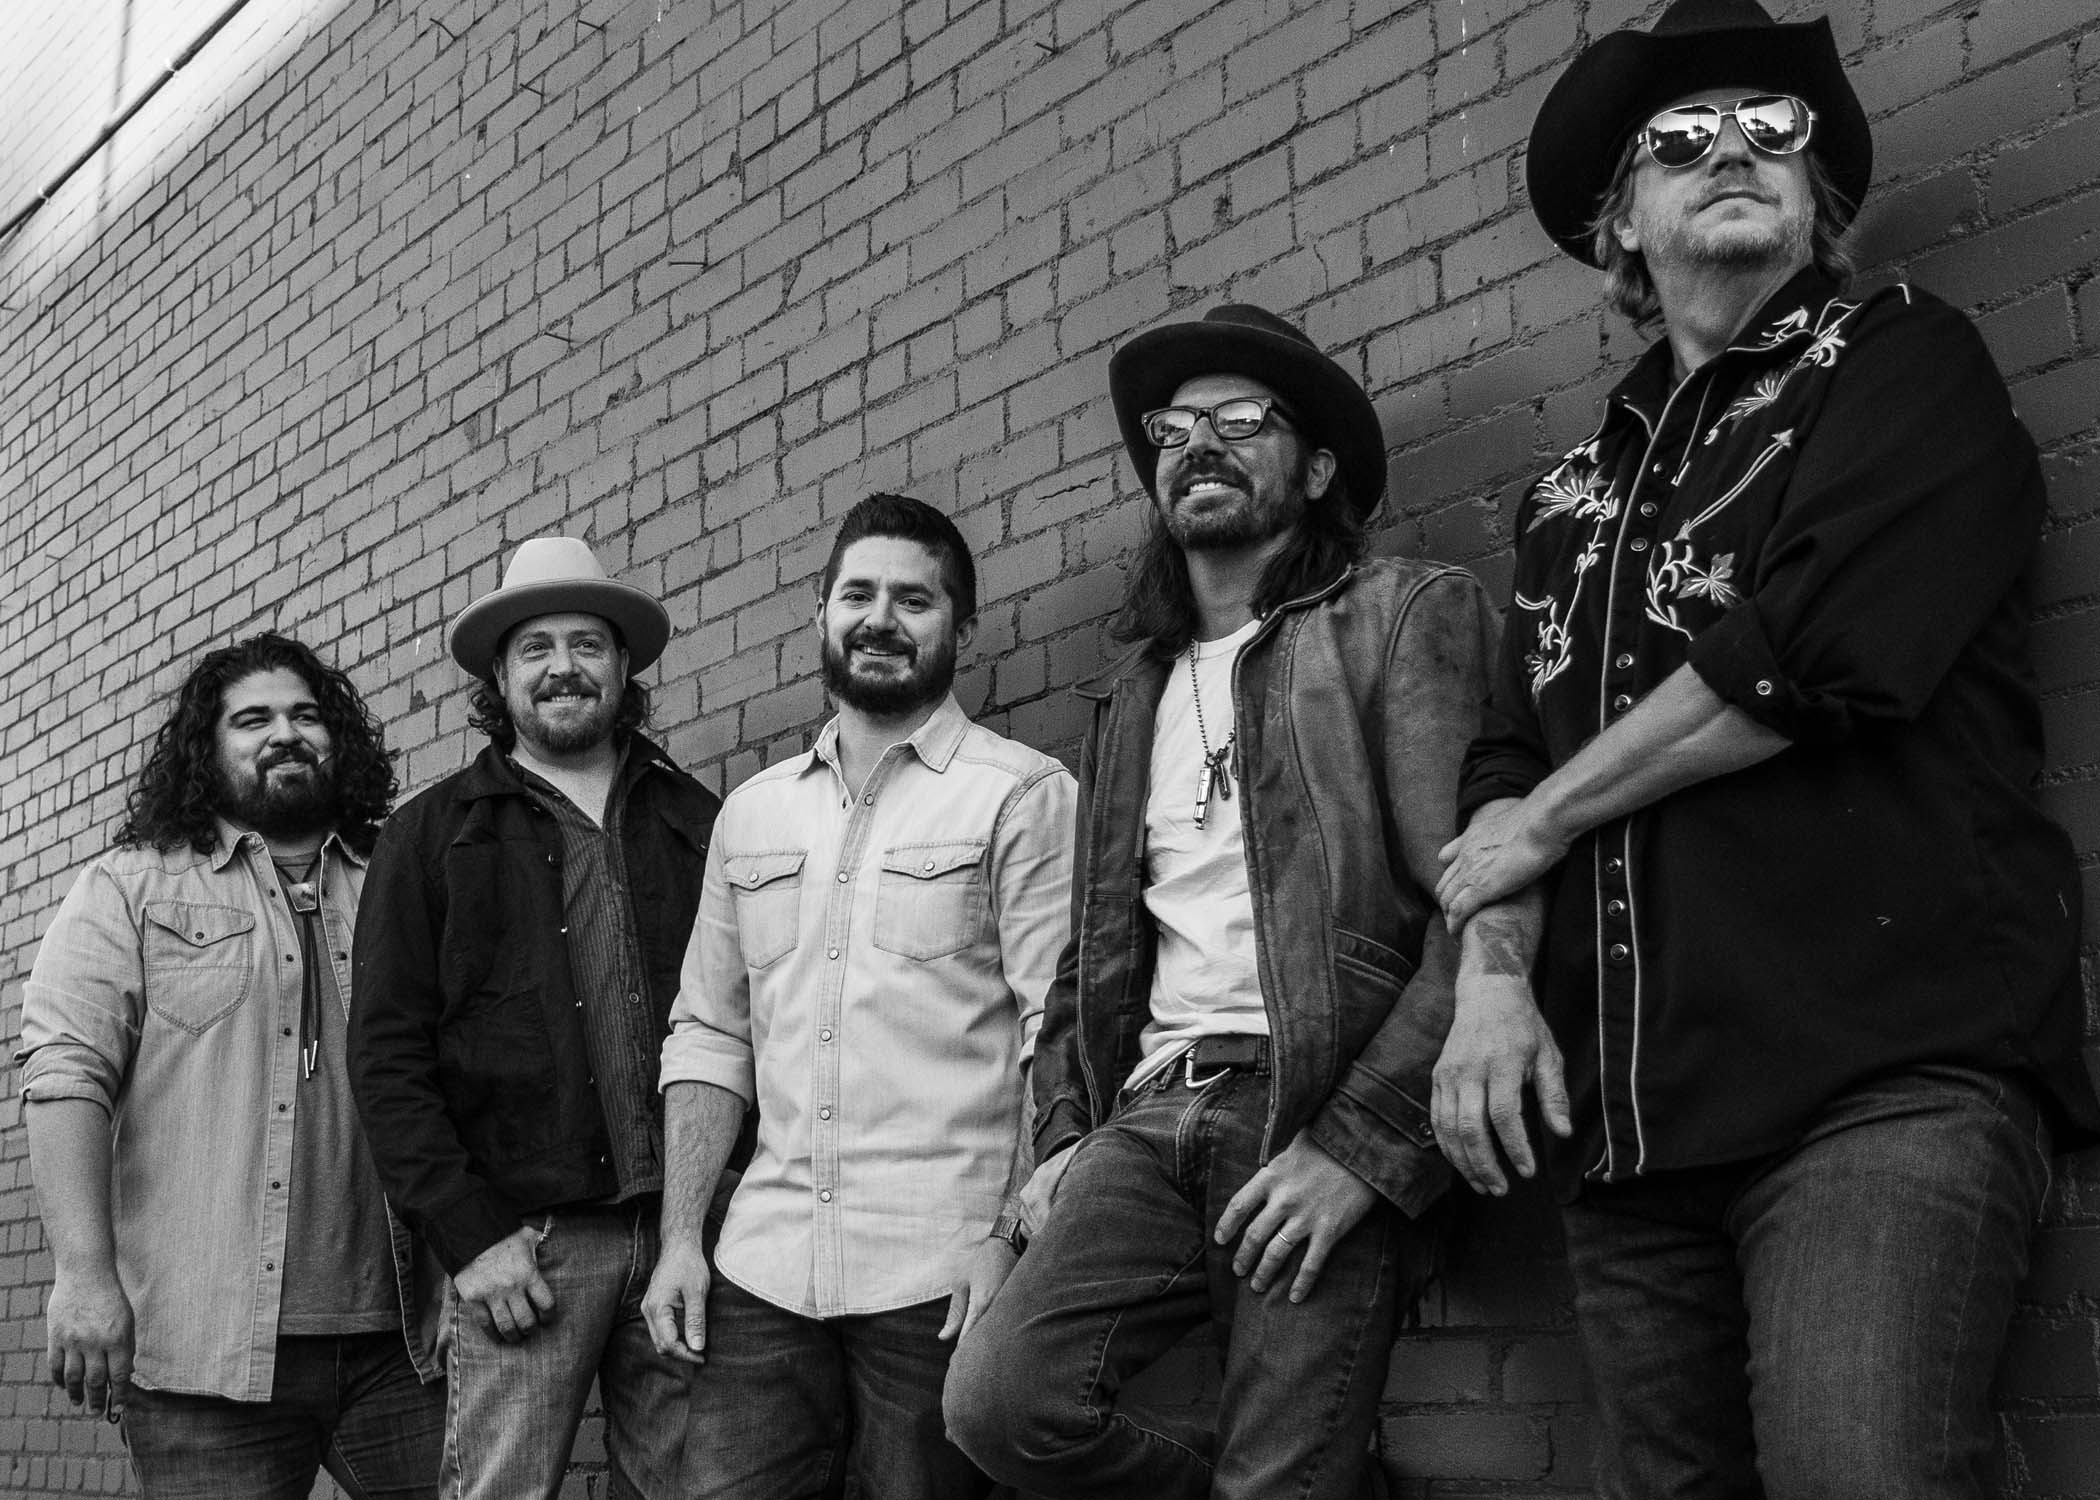 Micky and the Motorcars